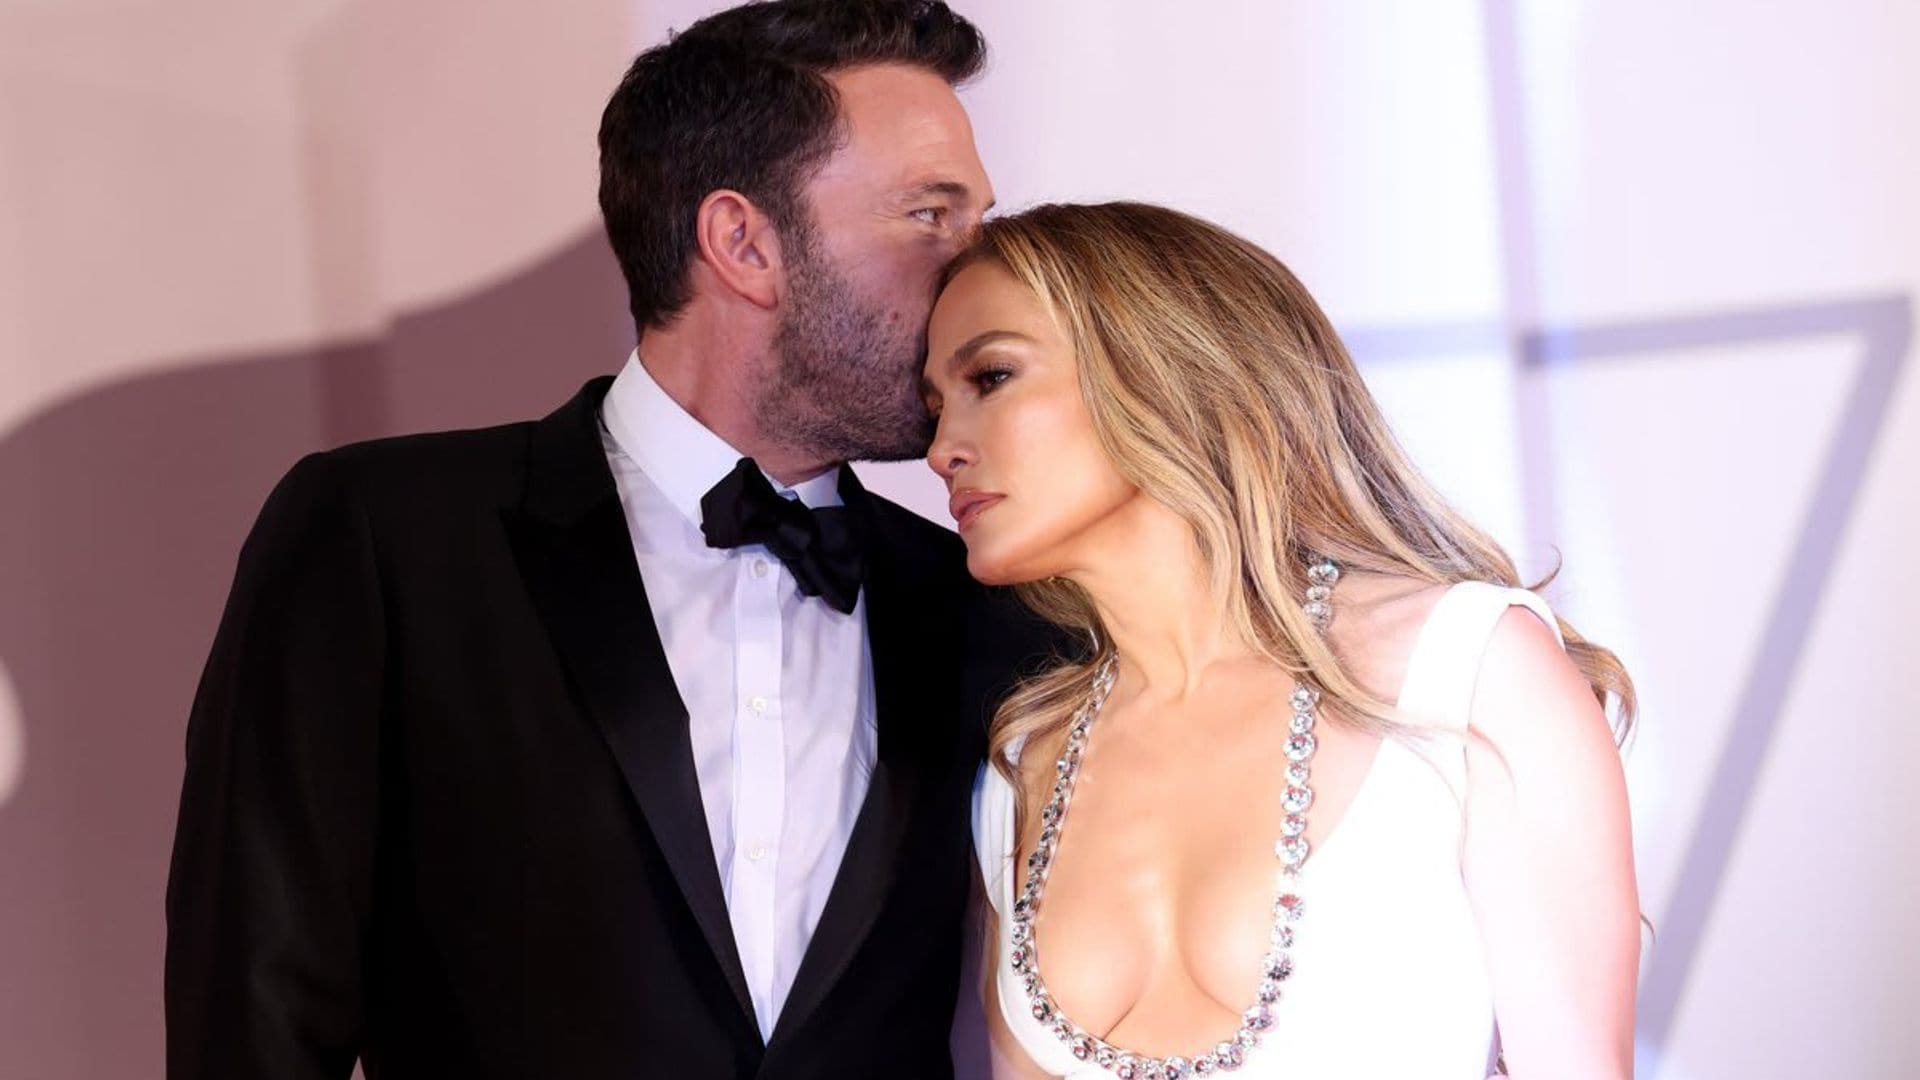 Will Jennifer Lopez get married to Ben Affleck this year? Her former publicist says the wedding is happening soon